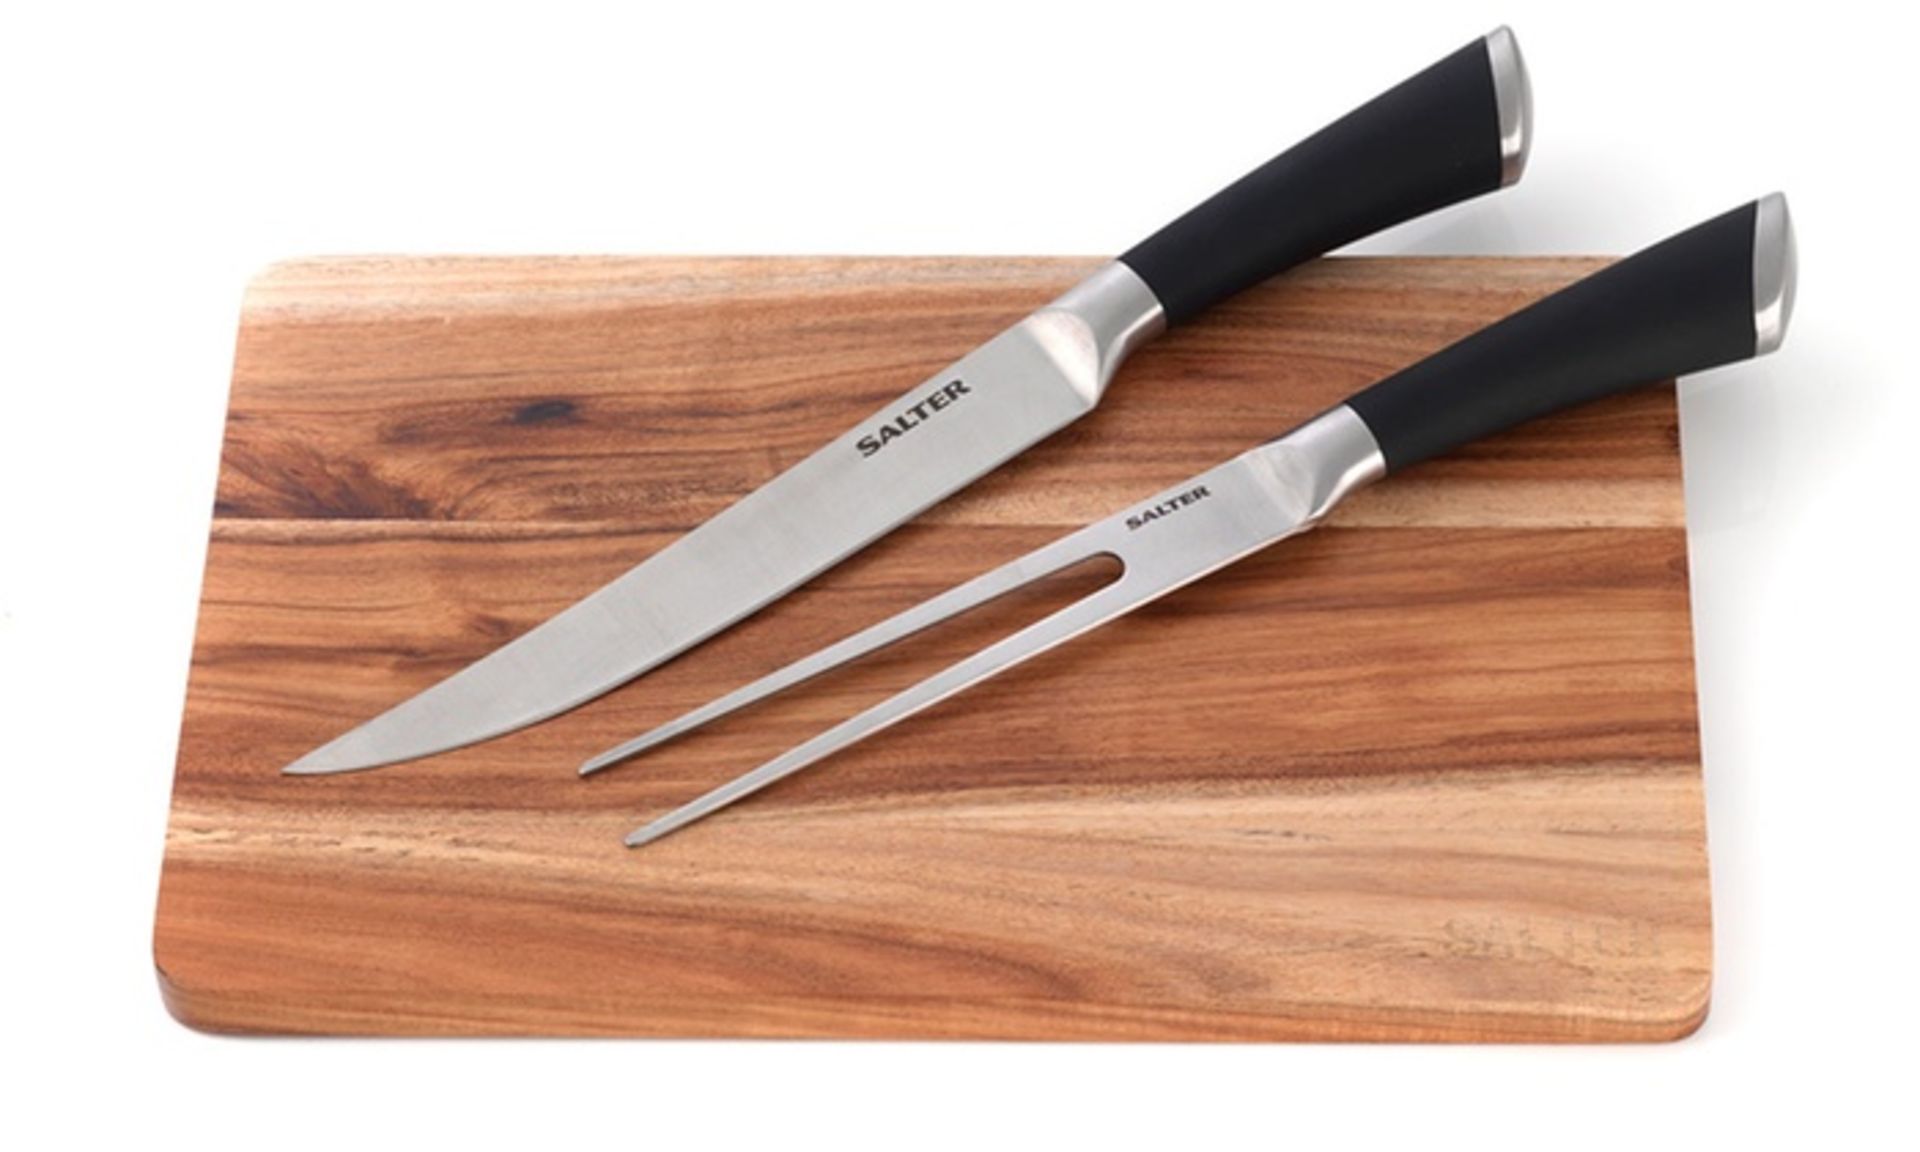 V *TRADE QTY* Brand New Salter Elegance Carving Knife And Fork With Chopping Board ISP £46.99 (